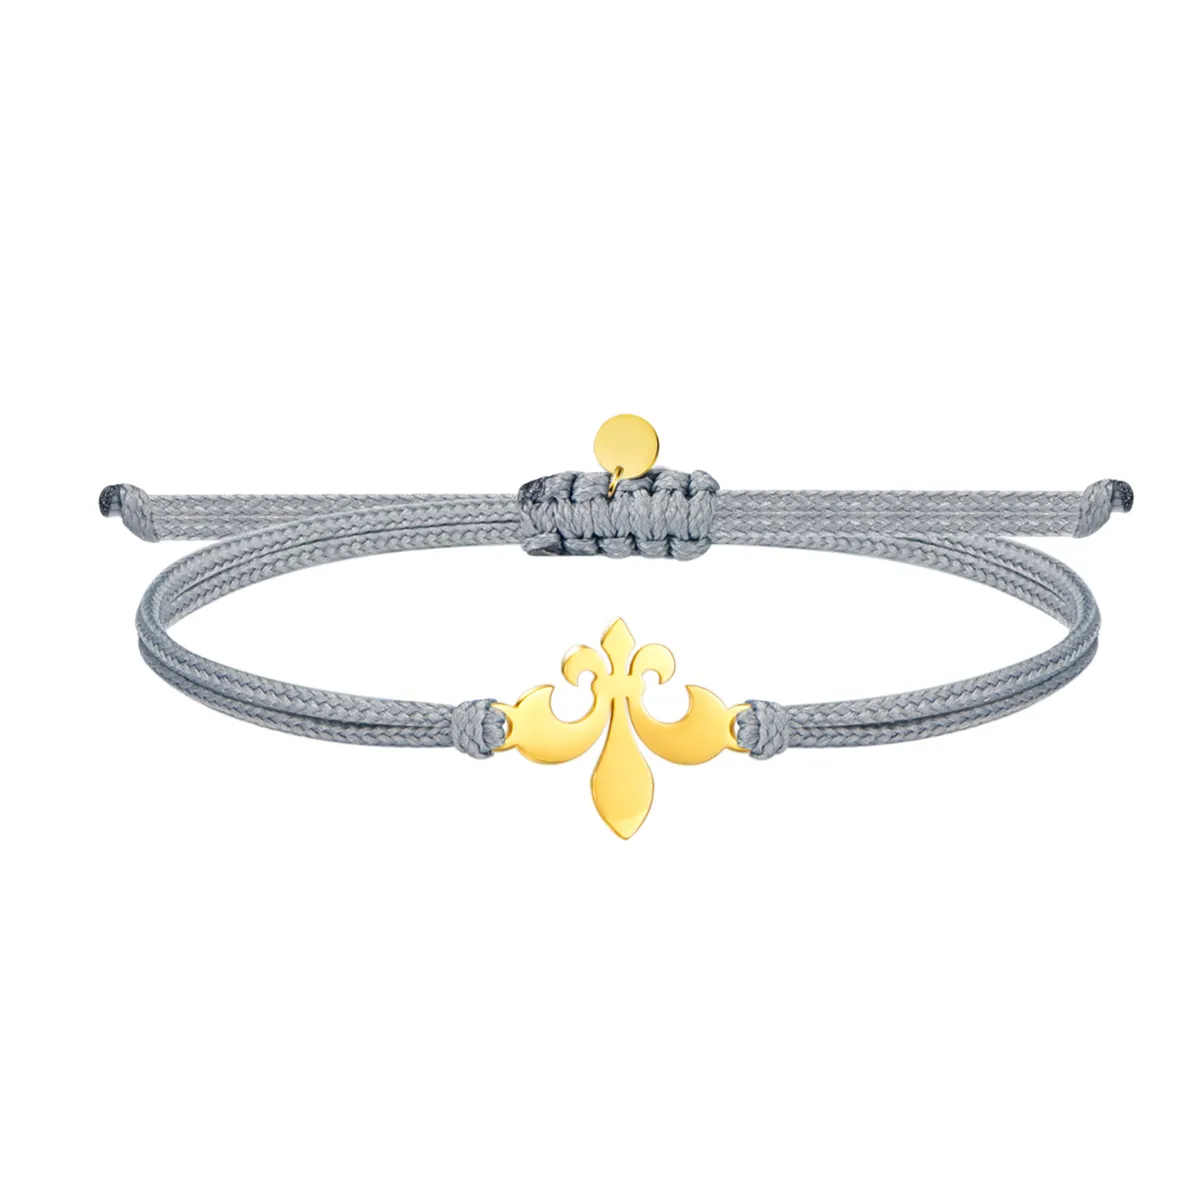 New Arrival braided colorful bracelet string with gold anchor charm